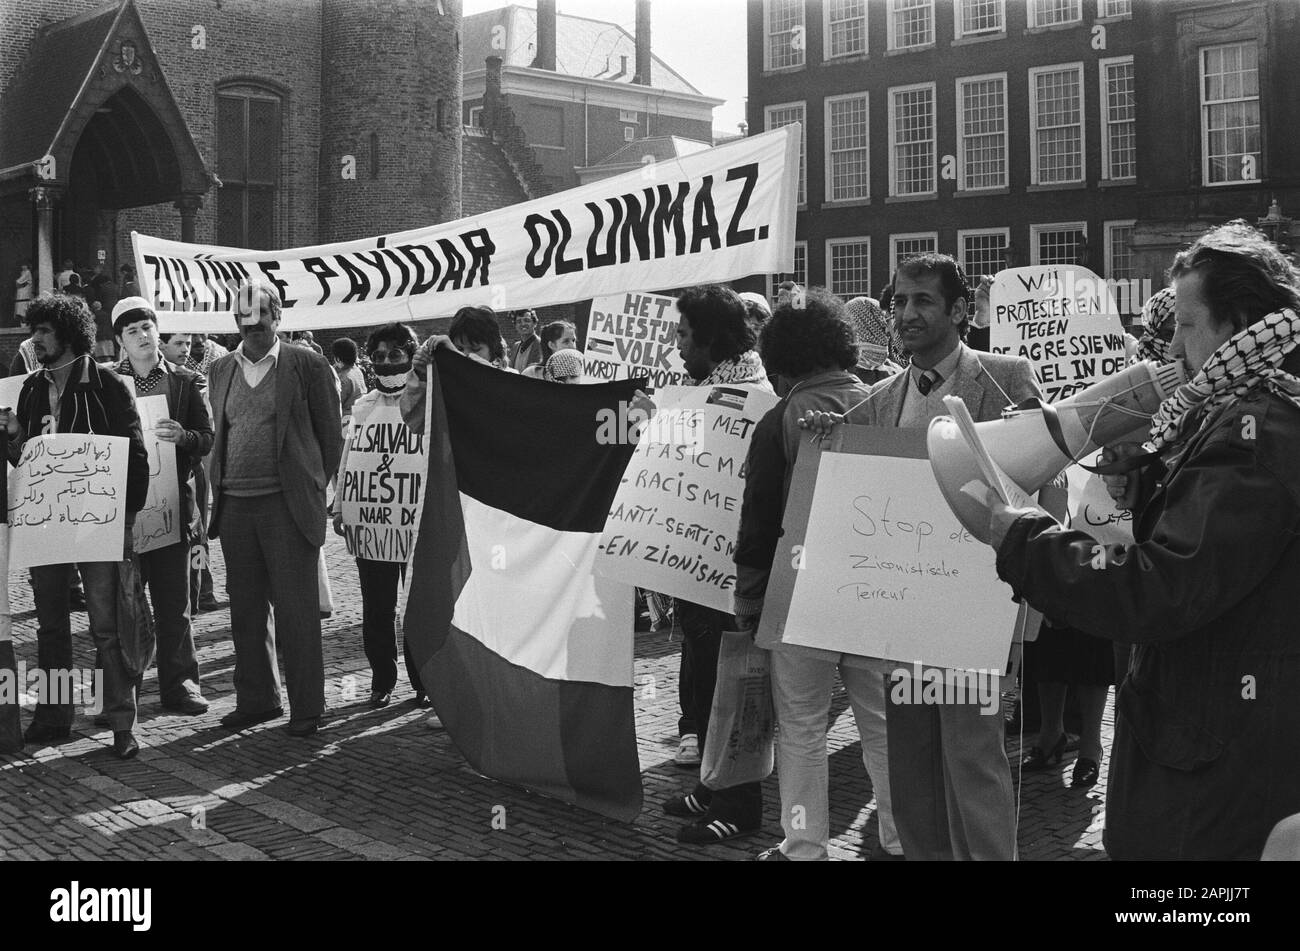 Demonstration at Binnenhof by Palestinian Association for cessation of murder Palestinian protesters Date: 16 april 1982 Location: Binnenhof, The Hague, Zuid-Holland Keywords: Demonstration, KILLINGER, protesters Stock Photo